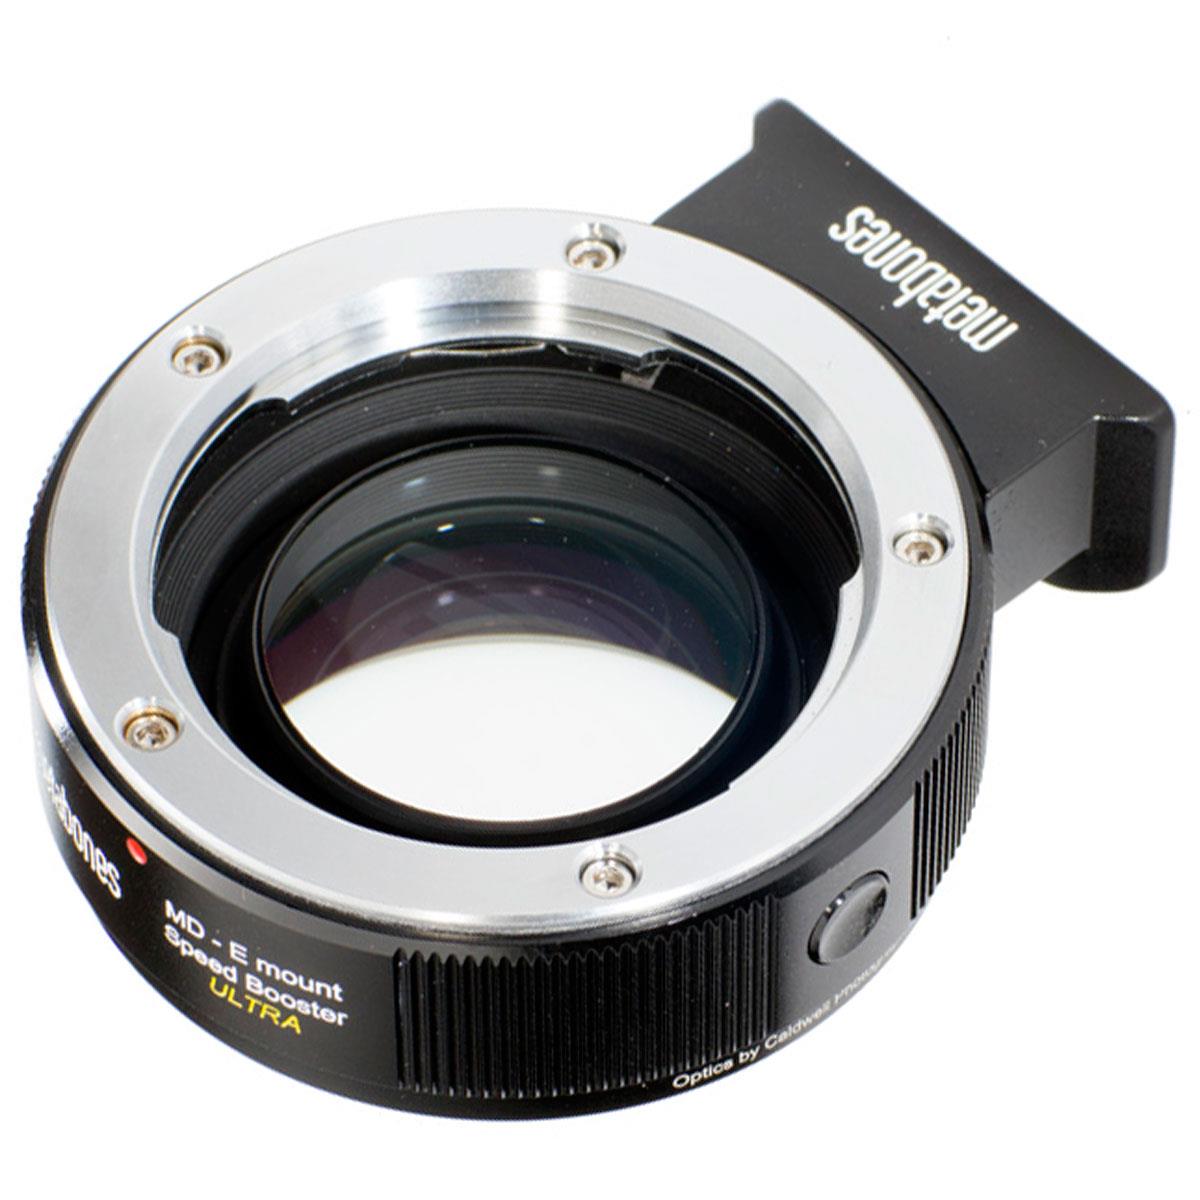 Image of Metabones Minolta MD Lens to Sony E-Mount Camera ULTRA Speed Booster